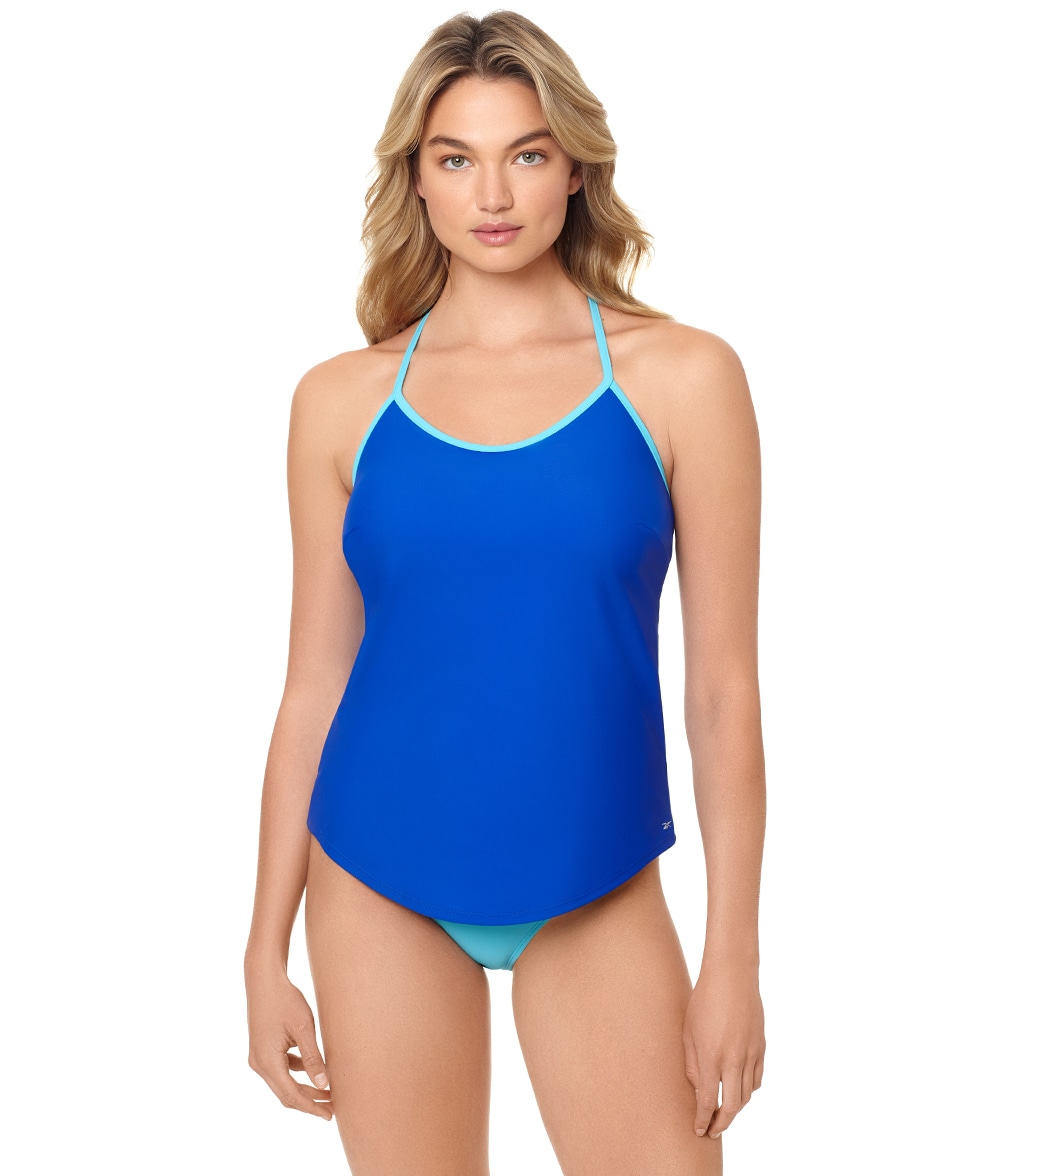 Reebok Women's Solid Strappy Tankini Top - Blue Large - Swimoutlet.com